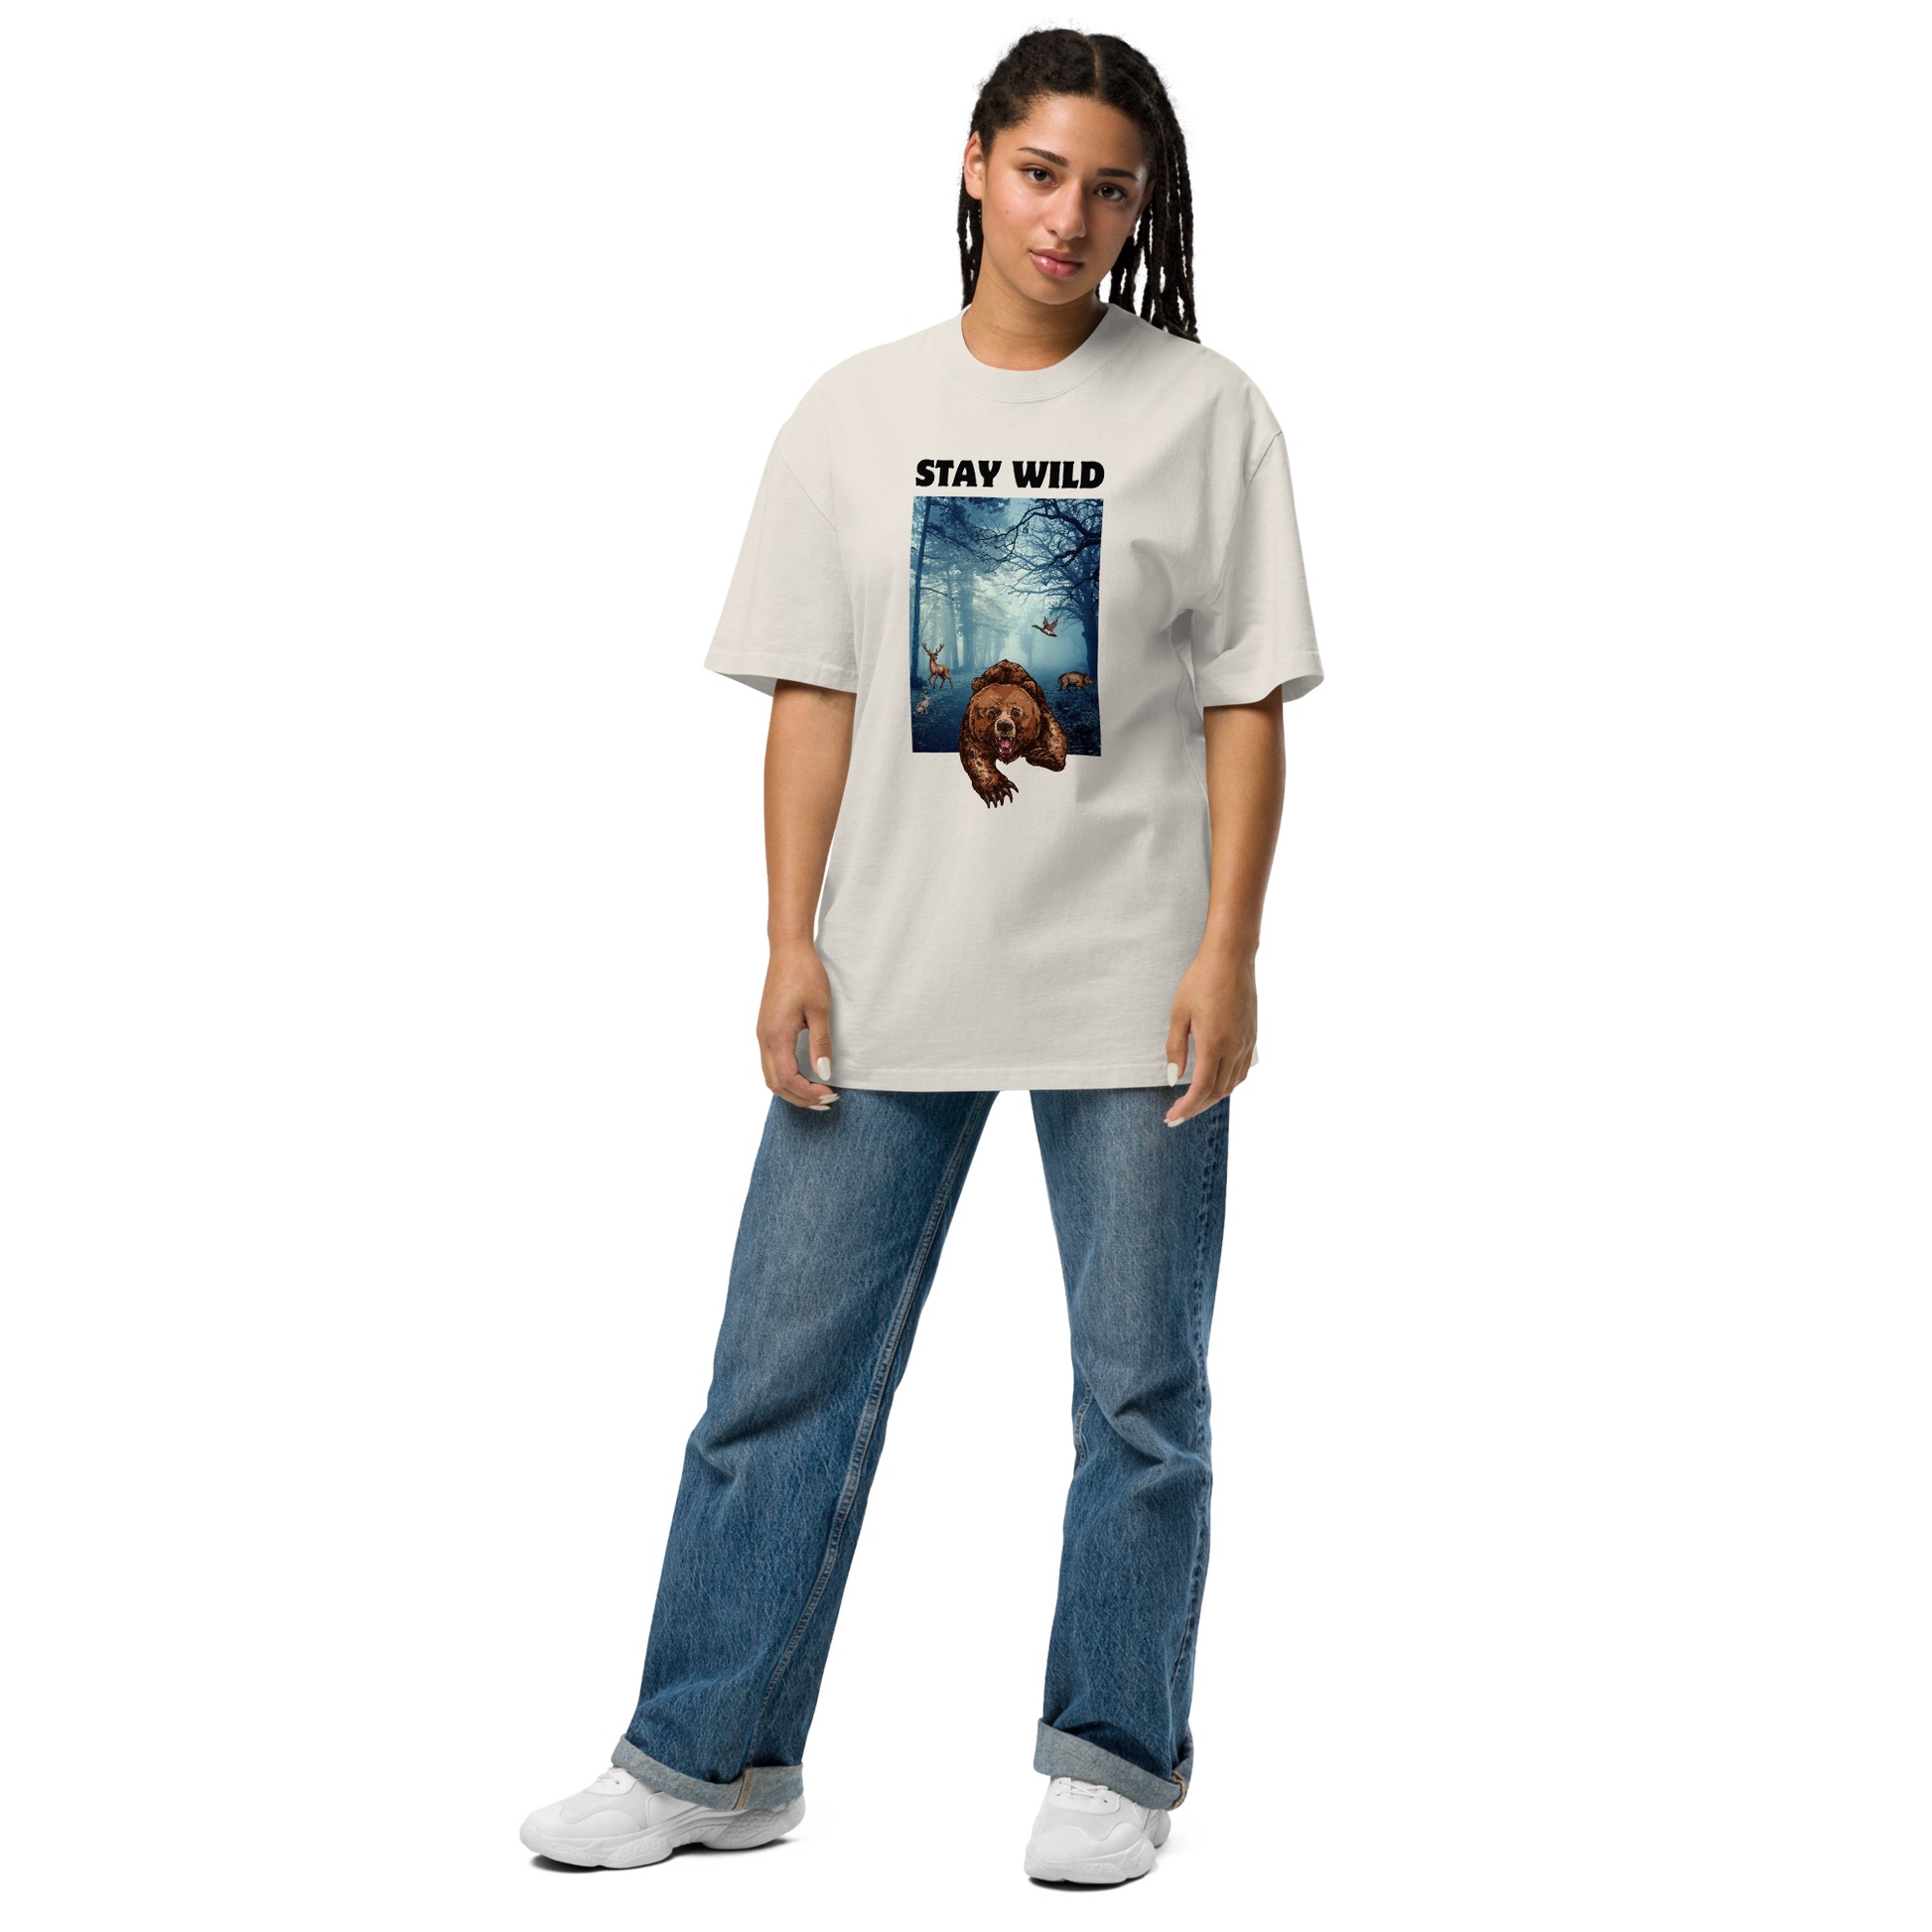 Woman wearing a Faded Bone Bear Oversized T-Shirt featuring a Stay Wild graphic on the chest - Cool Graphic Bear Oversized Tees - Boozy Fox